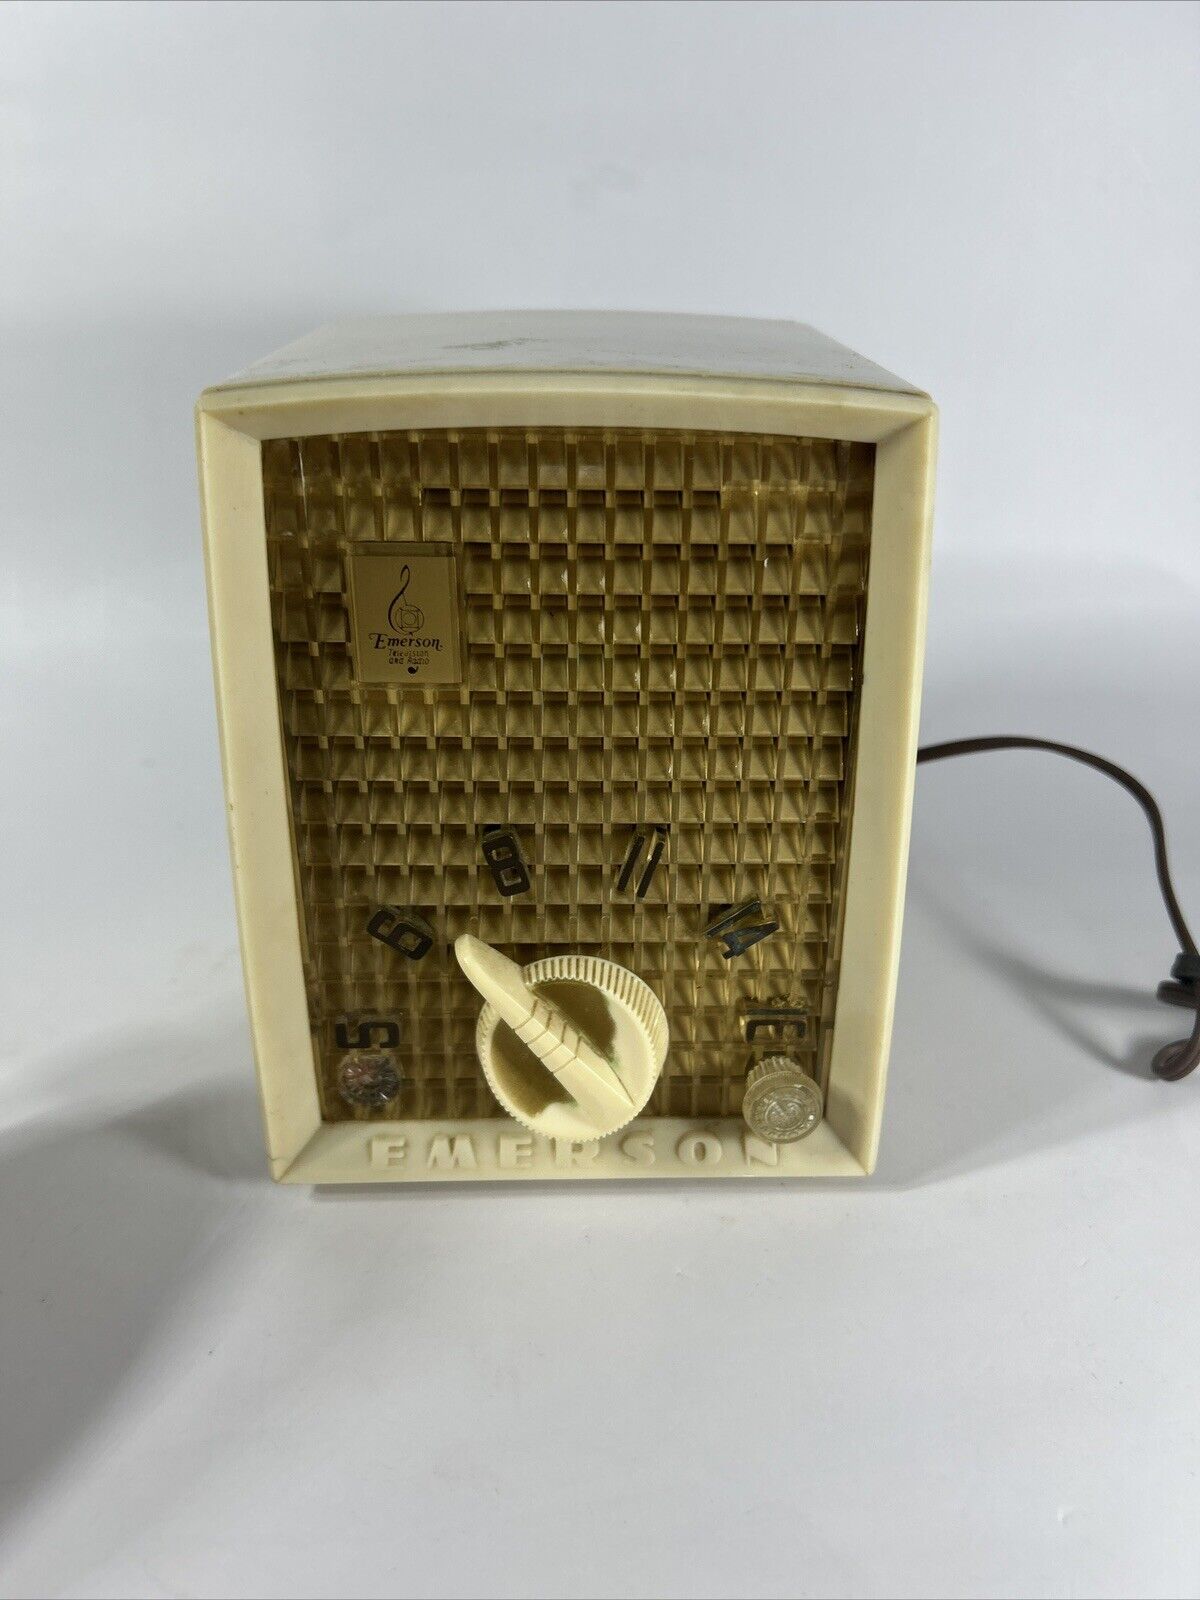 Emerson AM transistor Radio Cream Bakelite Tested And Working Great Plug & Play